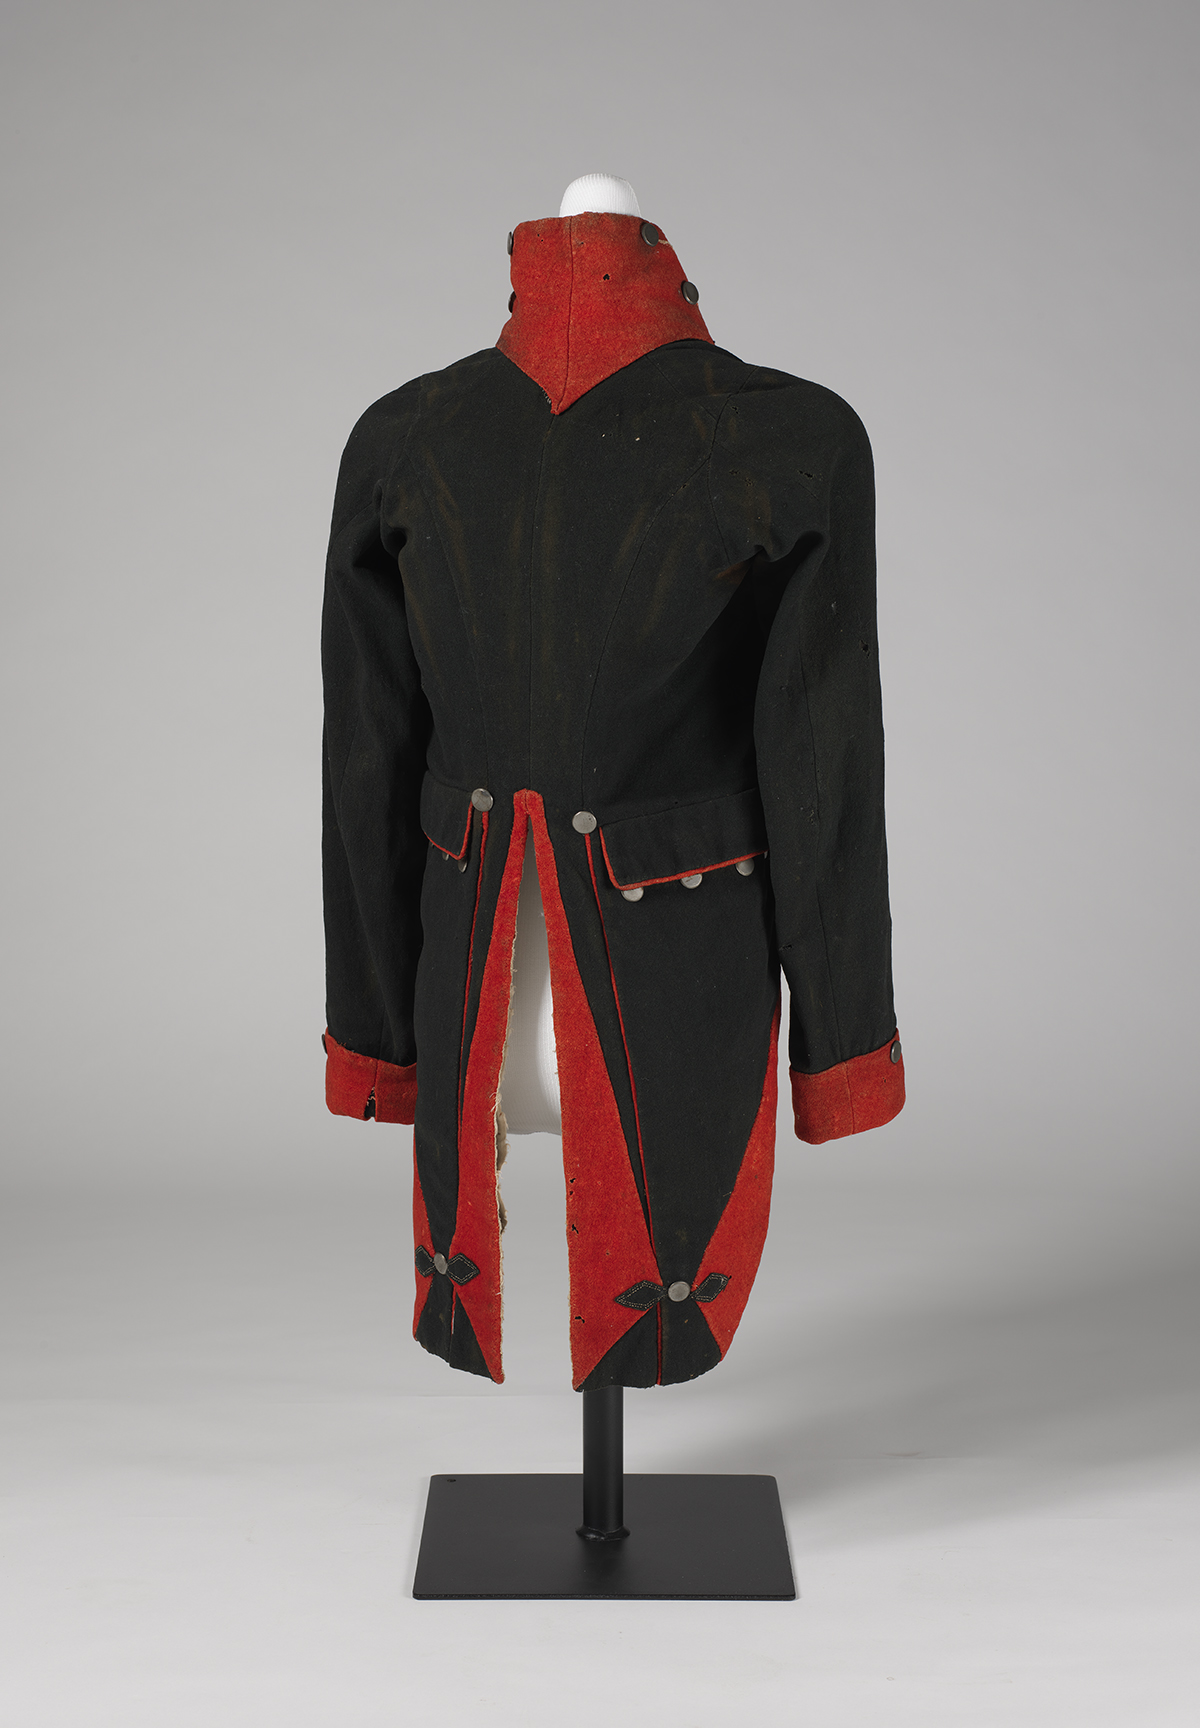 United States Army Infantry Coat (Back) worn by Martin Kirtland during the War of 1812